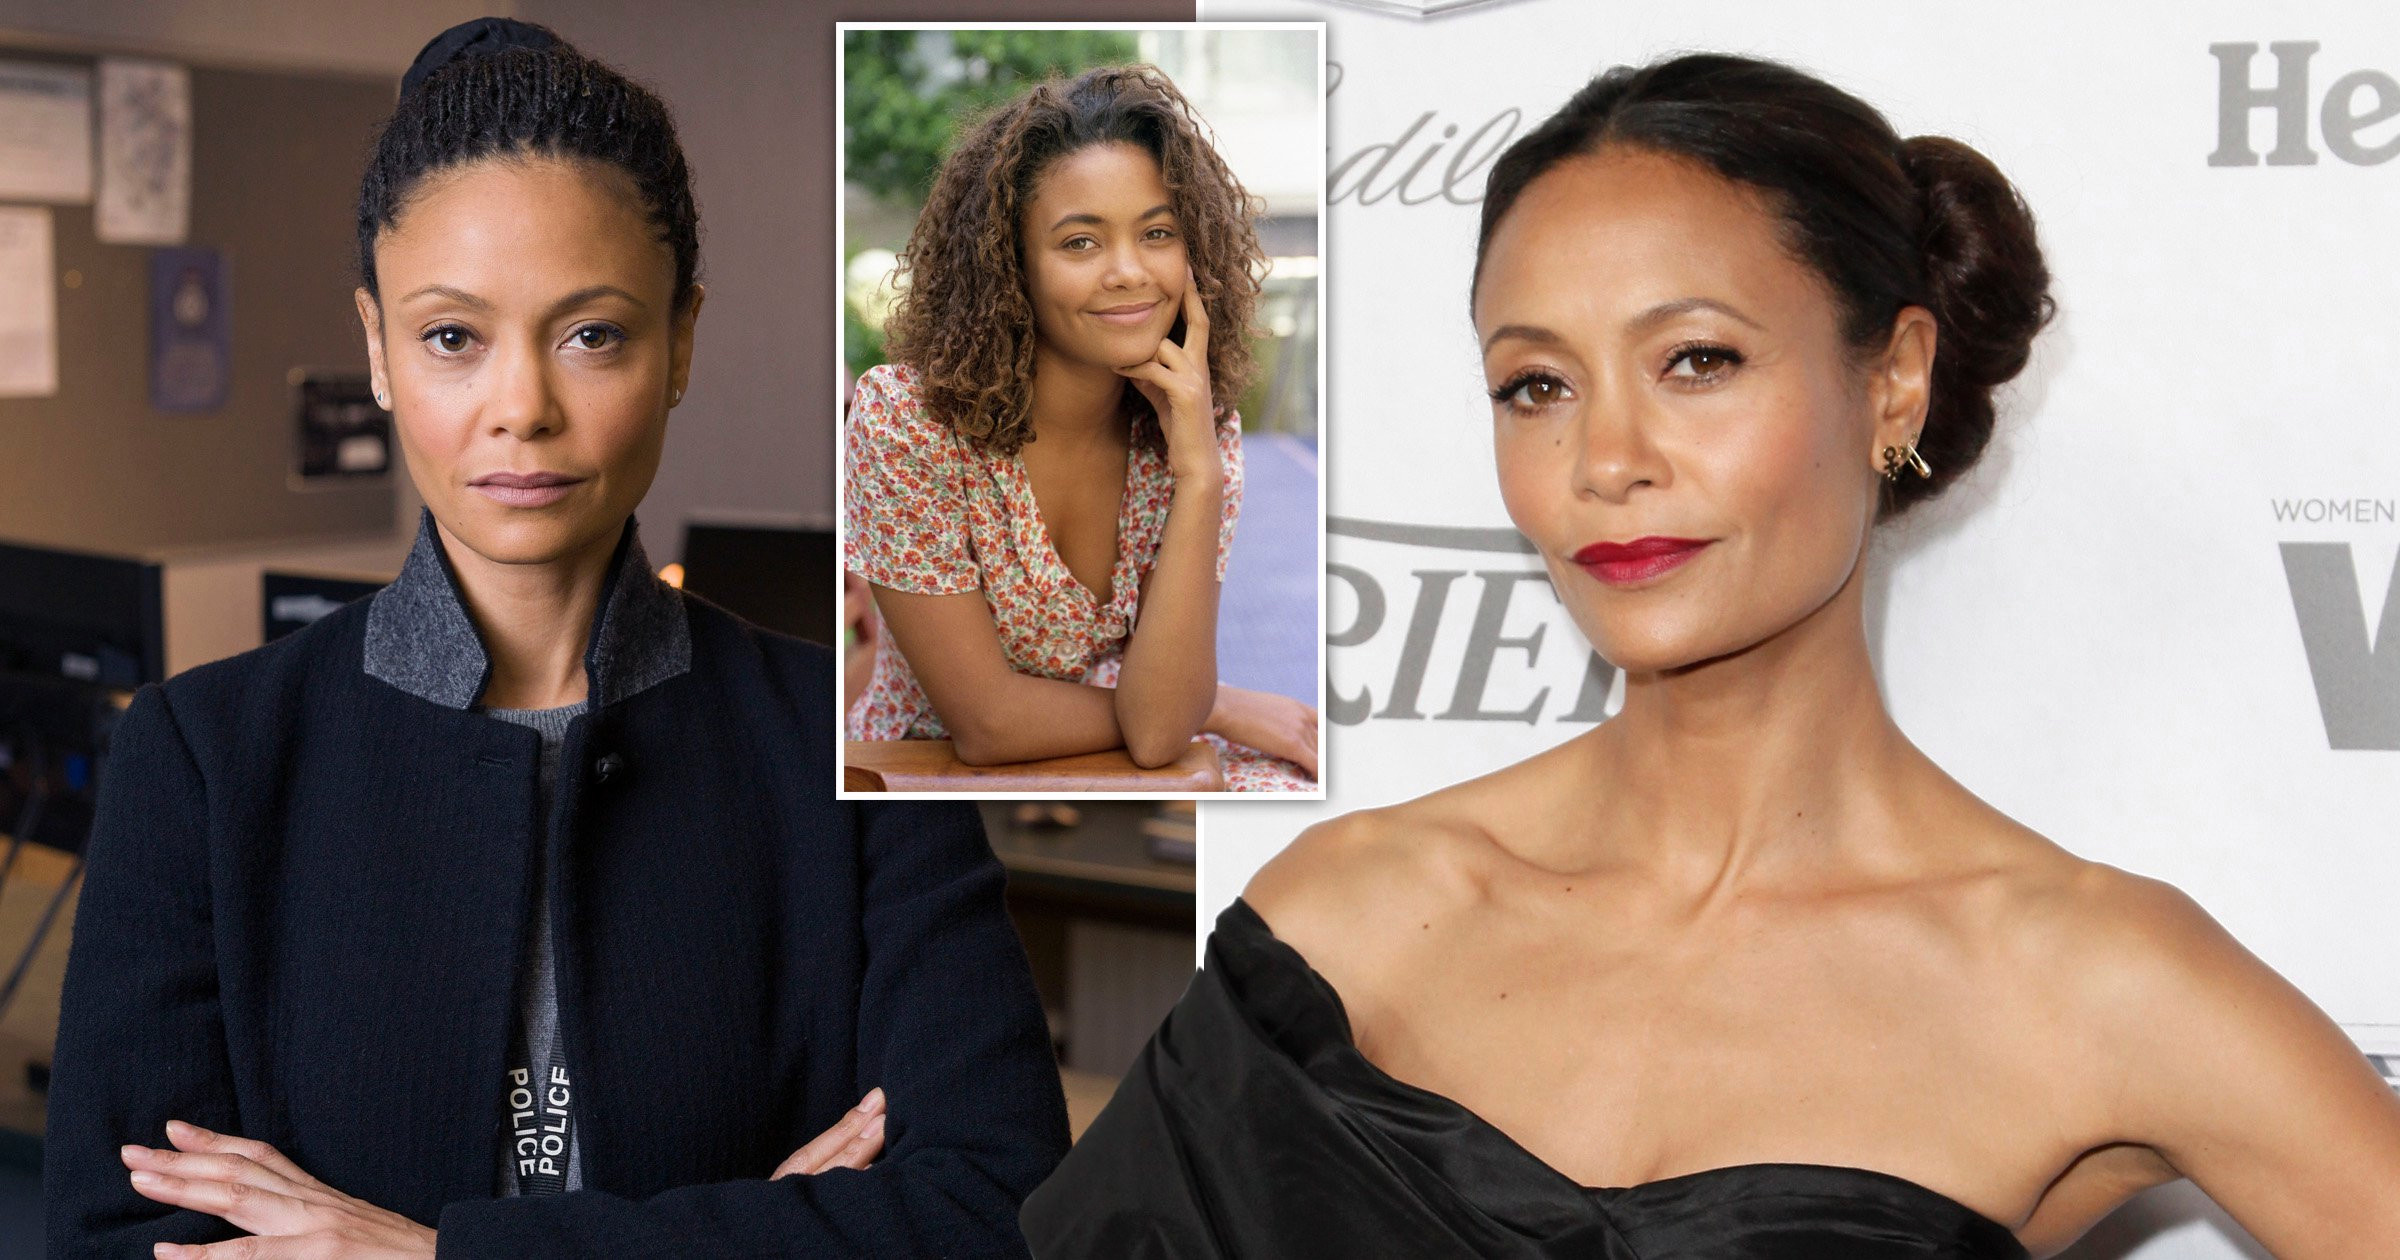 Line Of Duty’s Thandie Newton ‘derailed’ after being abused by director at 16: ‘I was traumatised’